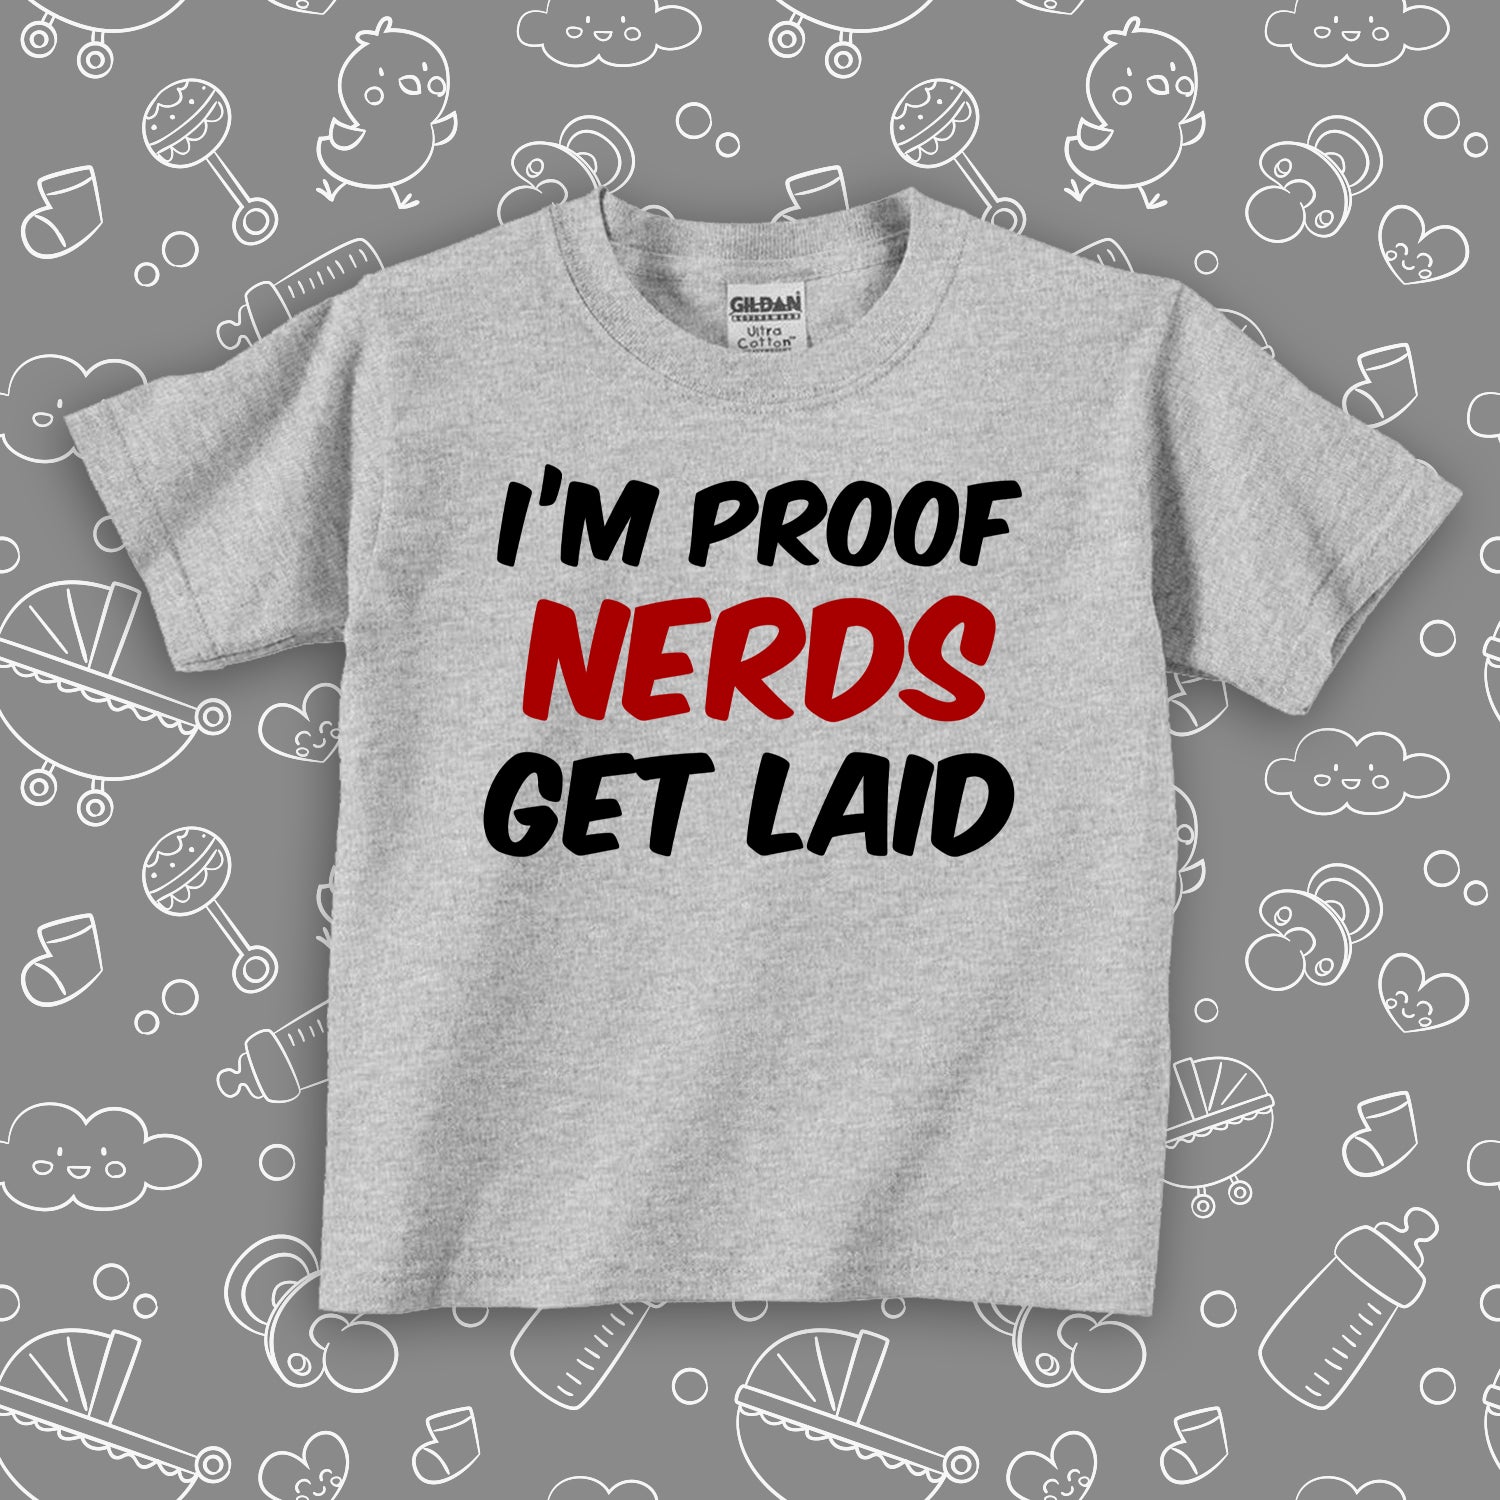  Funny toddler shirt with saying "I'm Proof Nerds Get Laid" in grey.